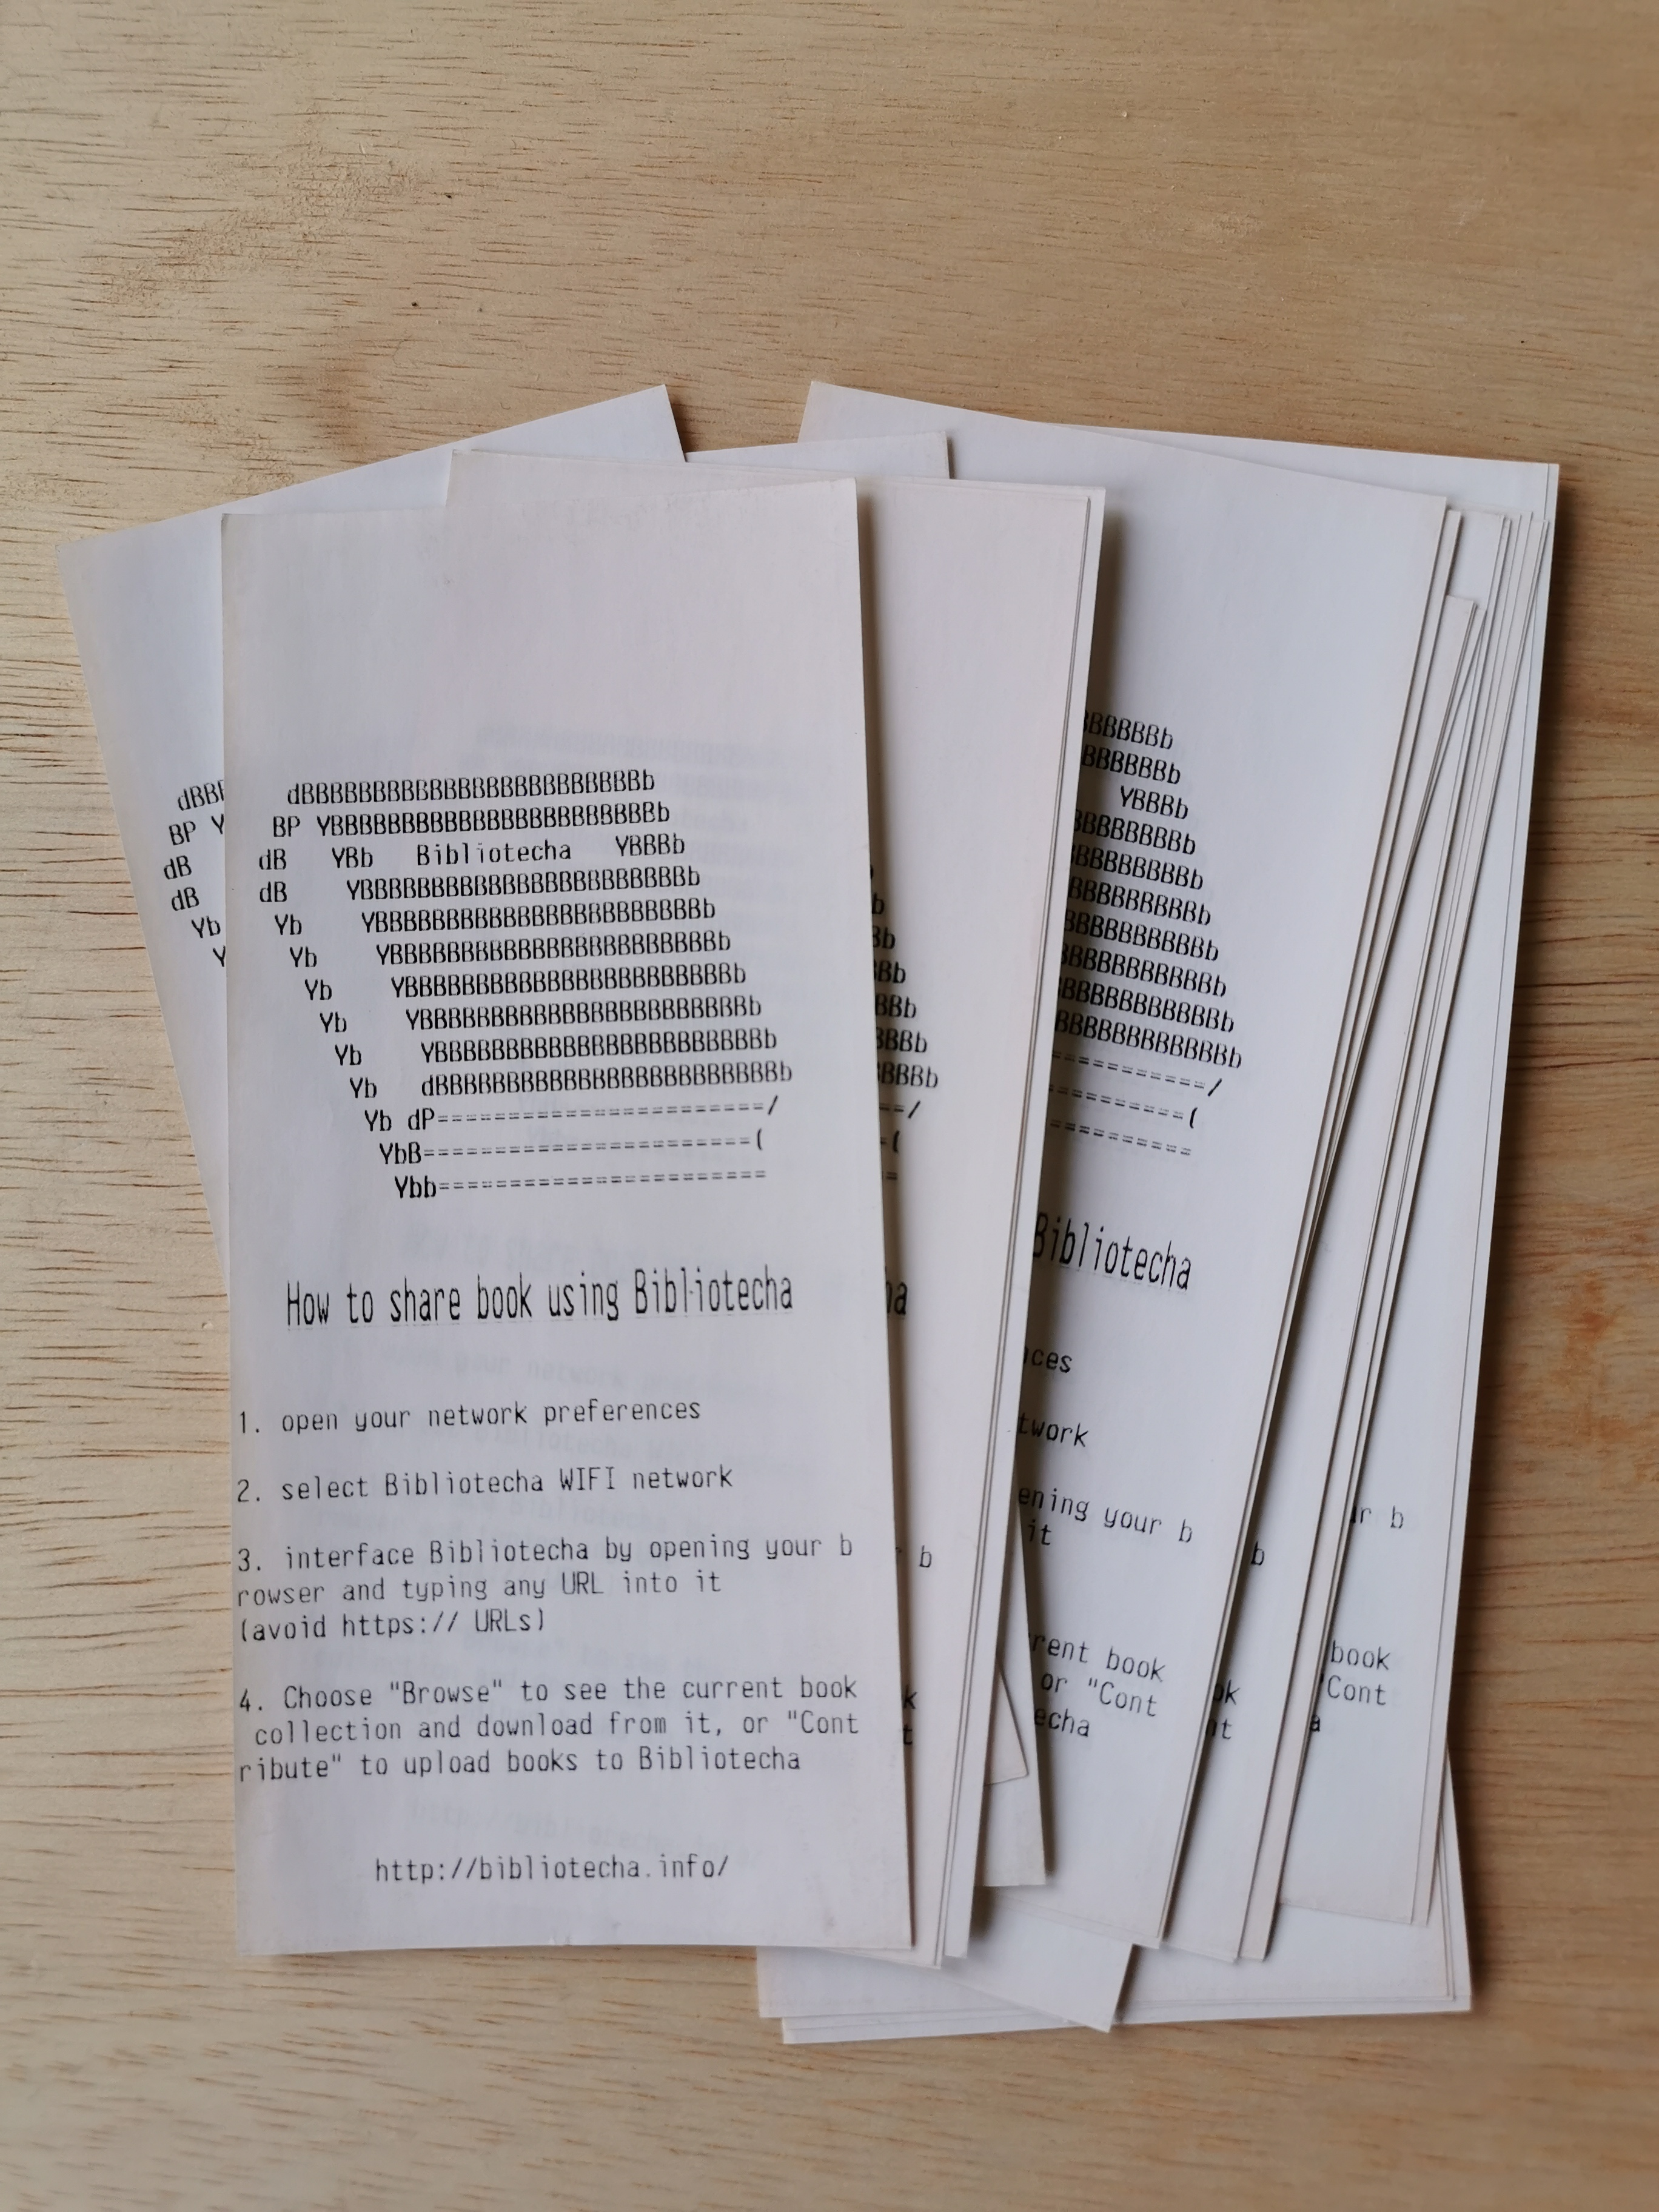 A thermal receipt print manual on how to use Bibliotecha